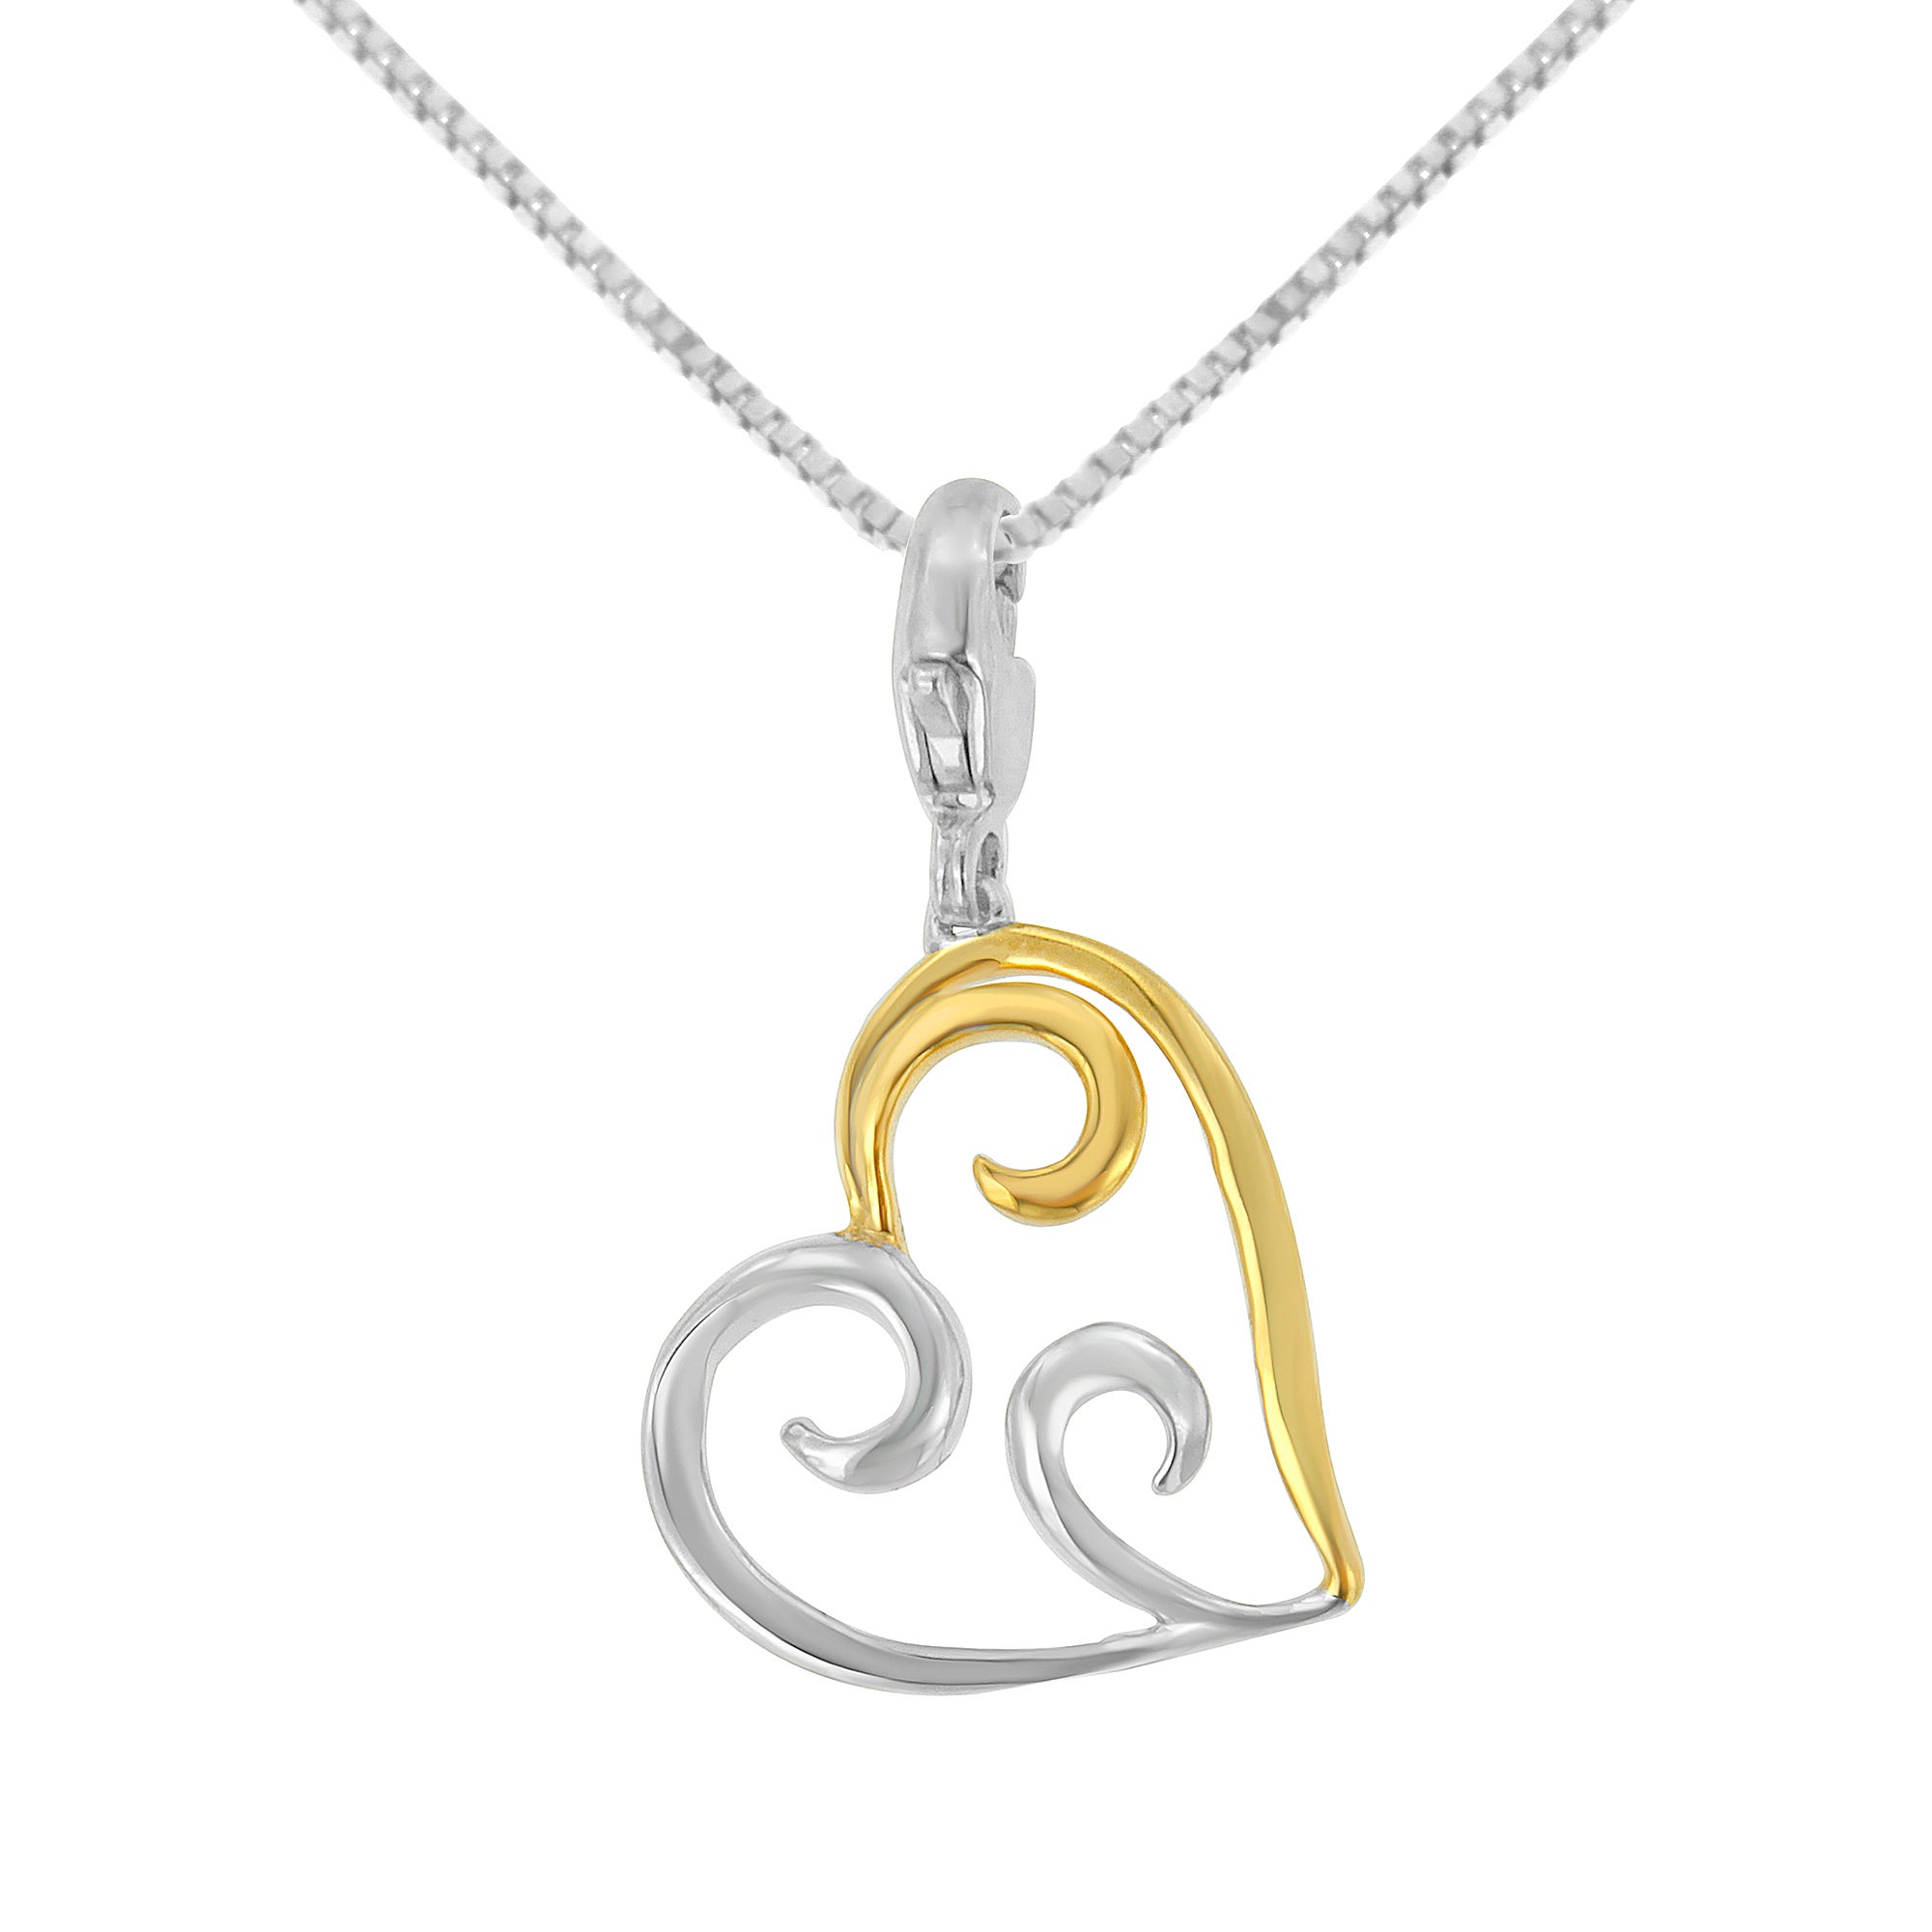 Two tone .925 Sterling Silver Heart shaped Pendant Necklace